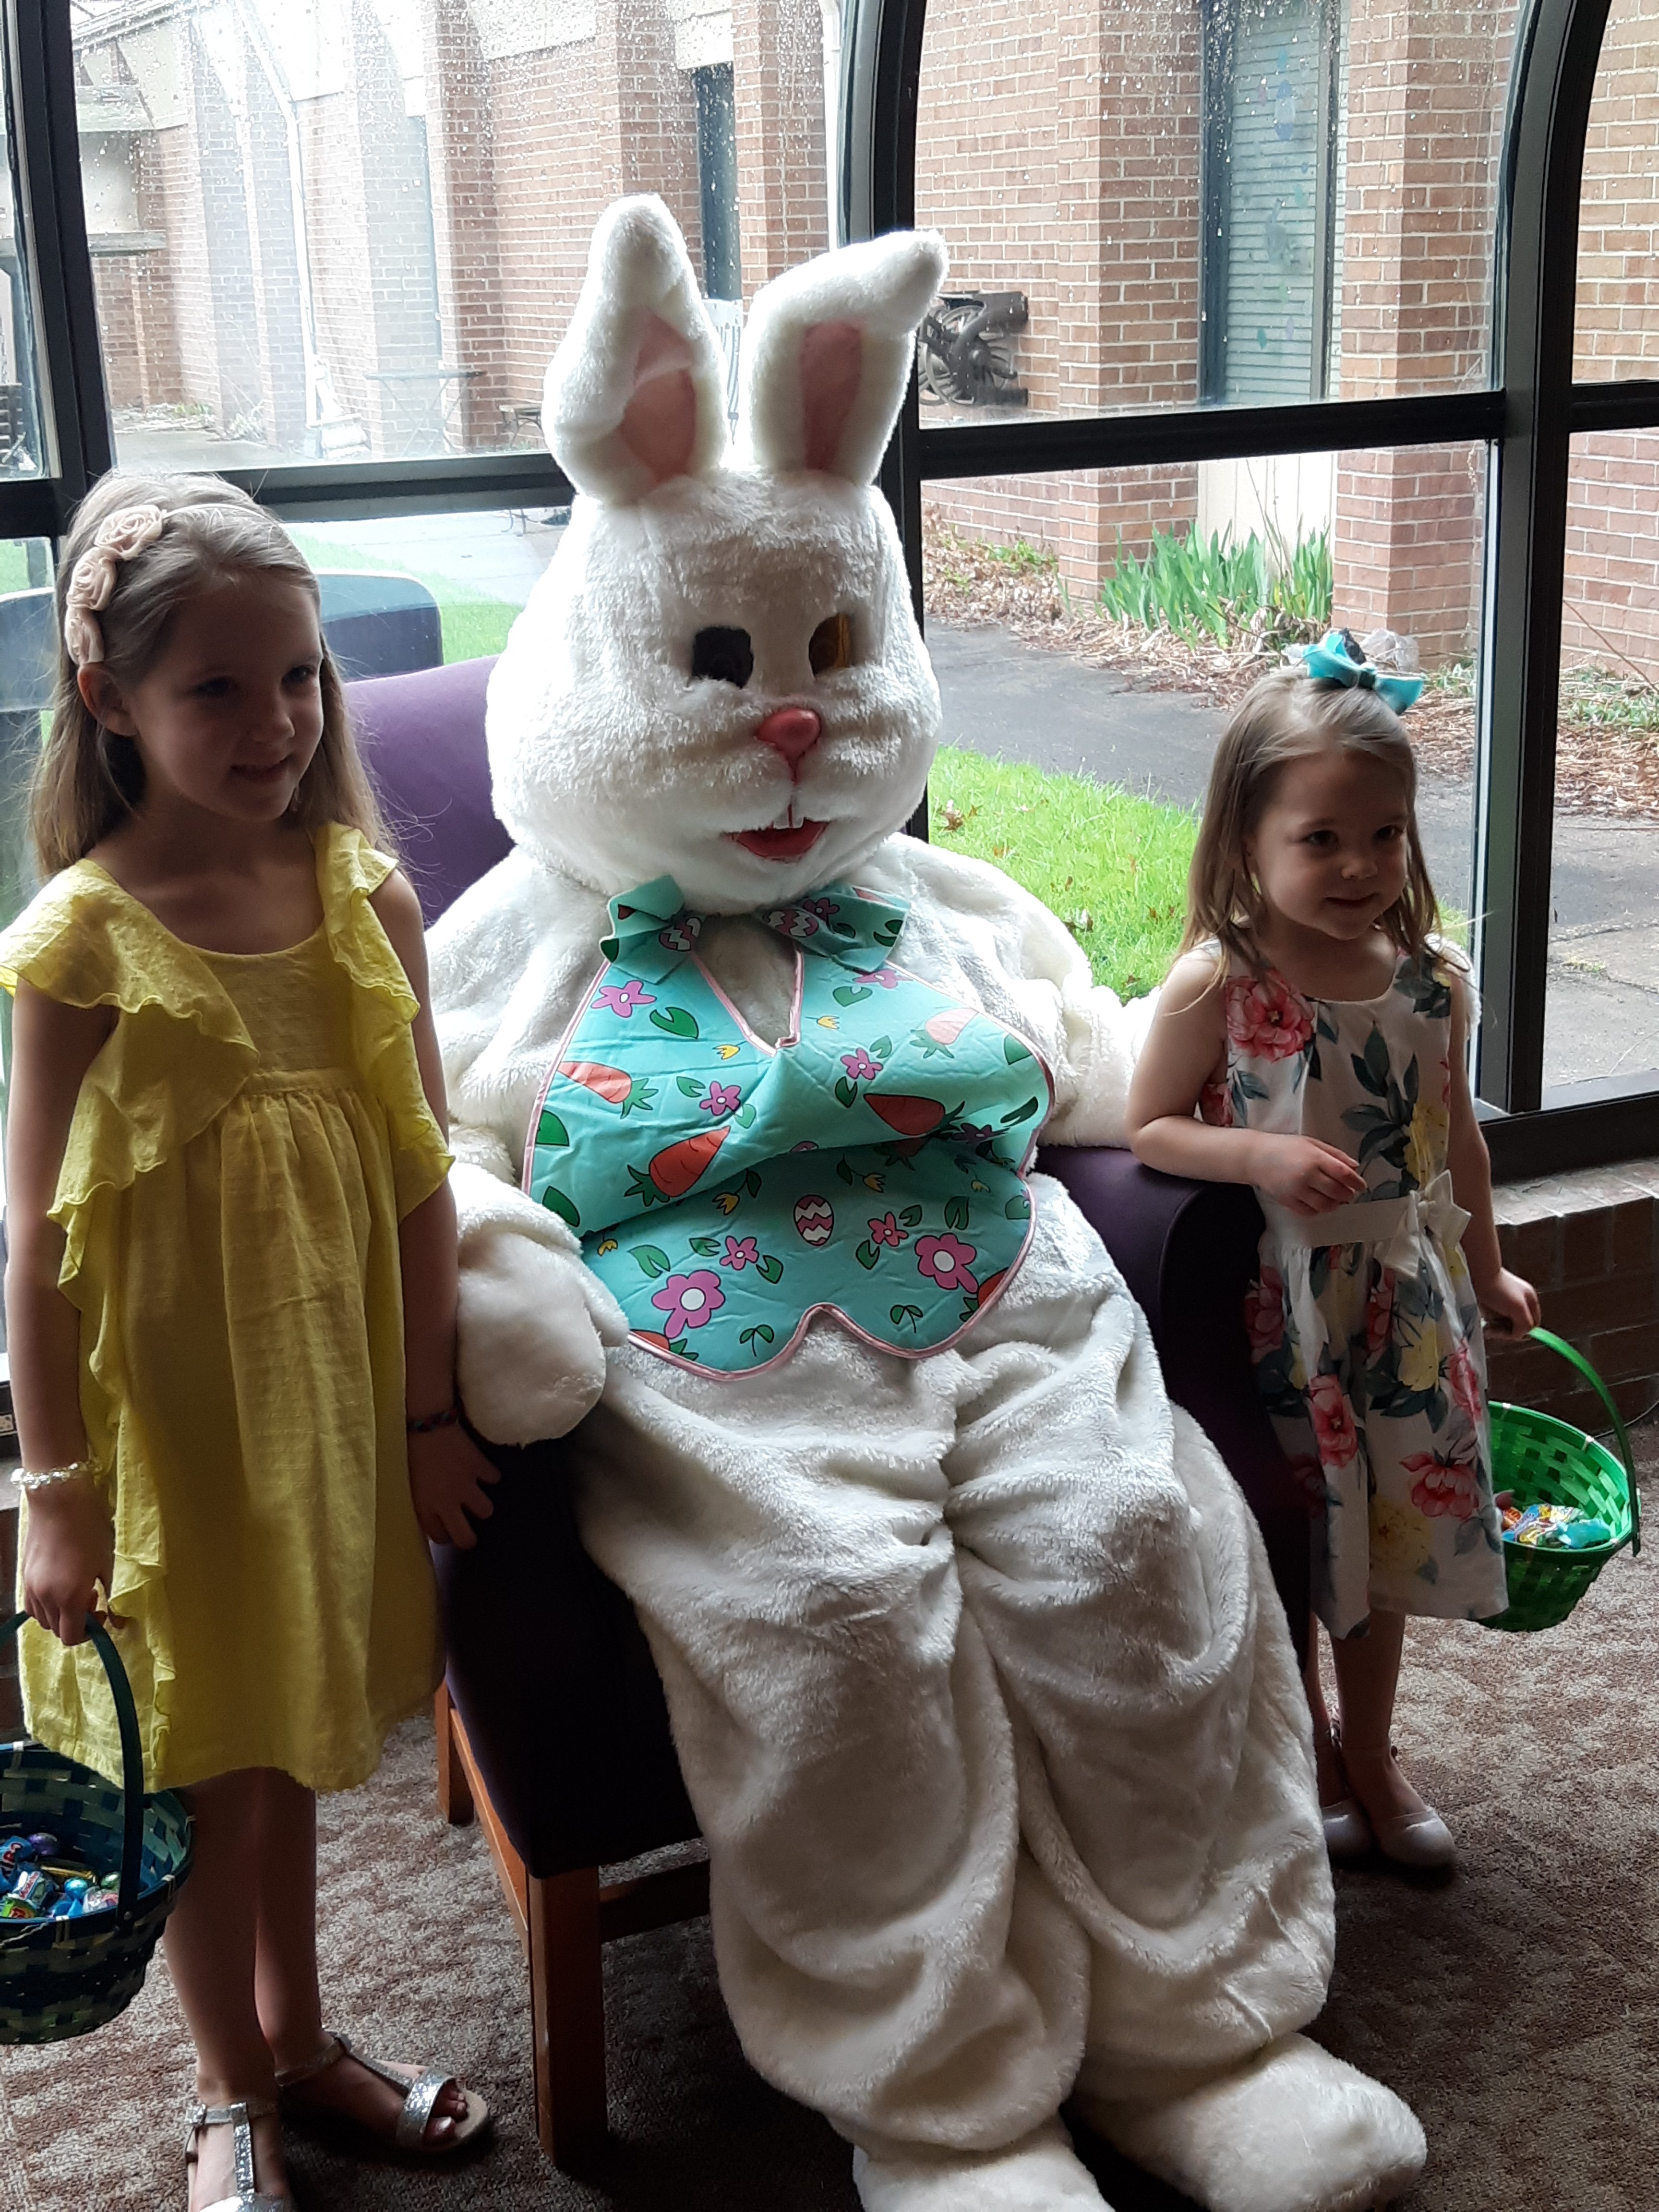 A fun time with the Easter Bunny